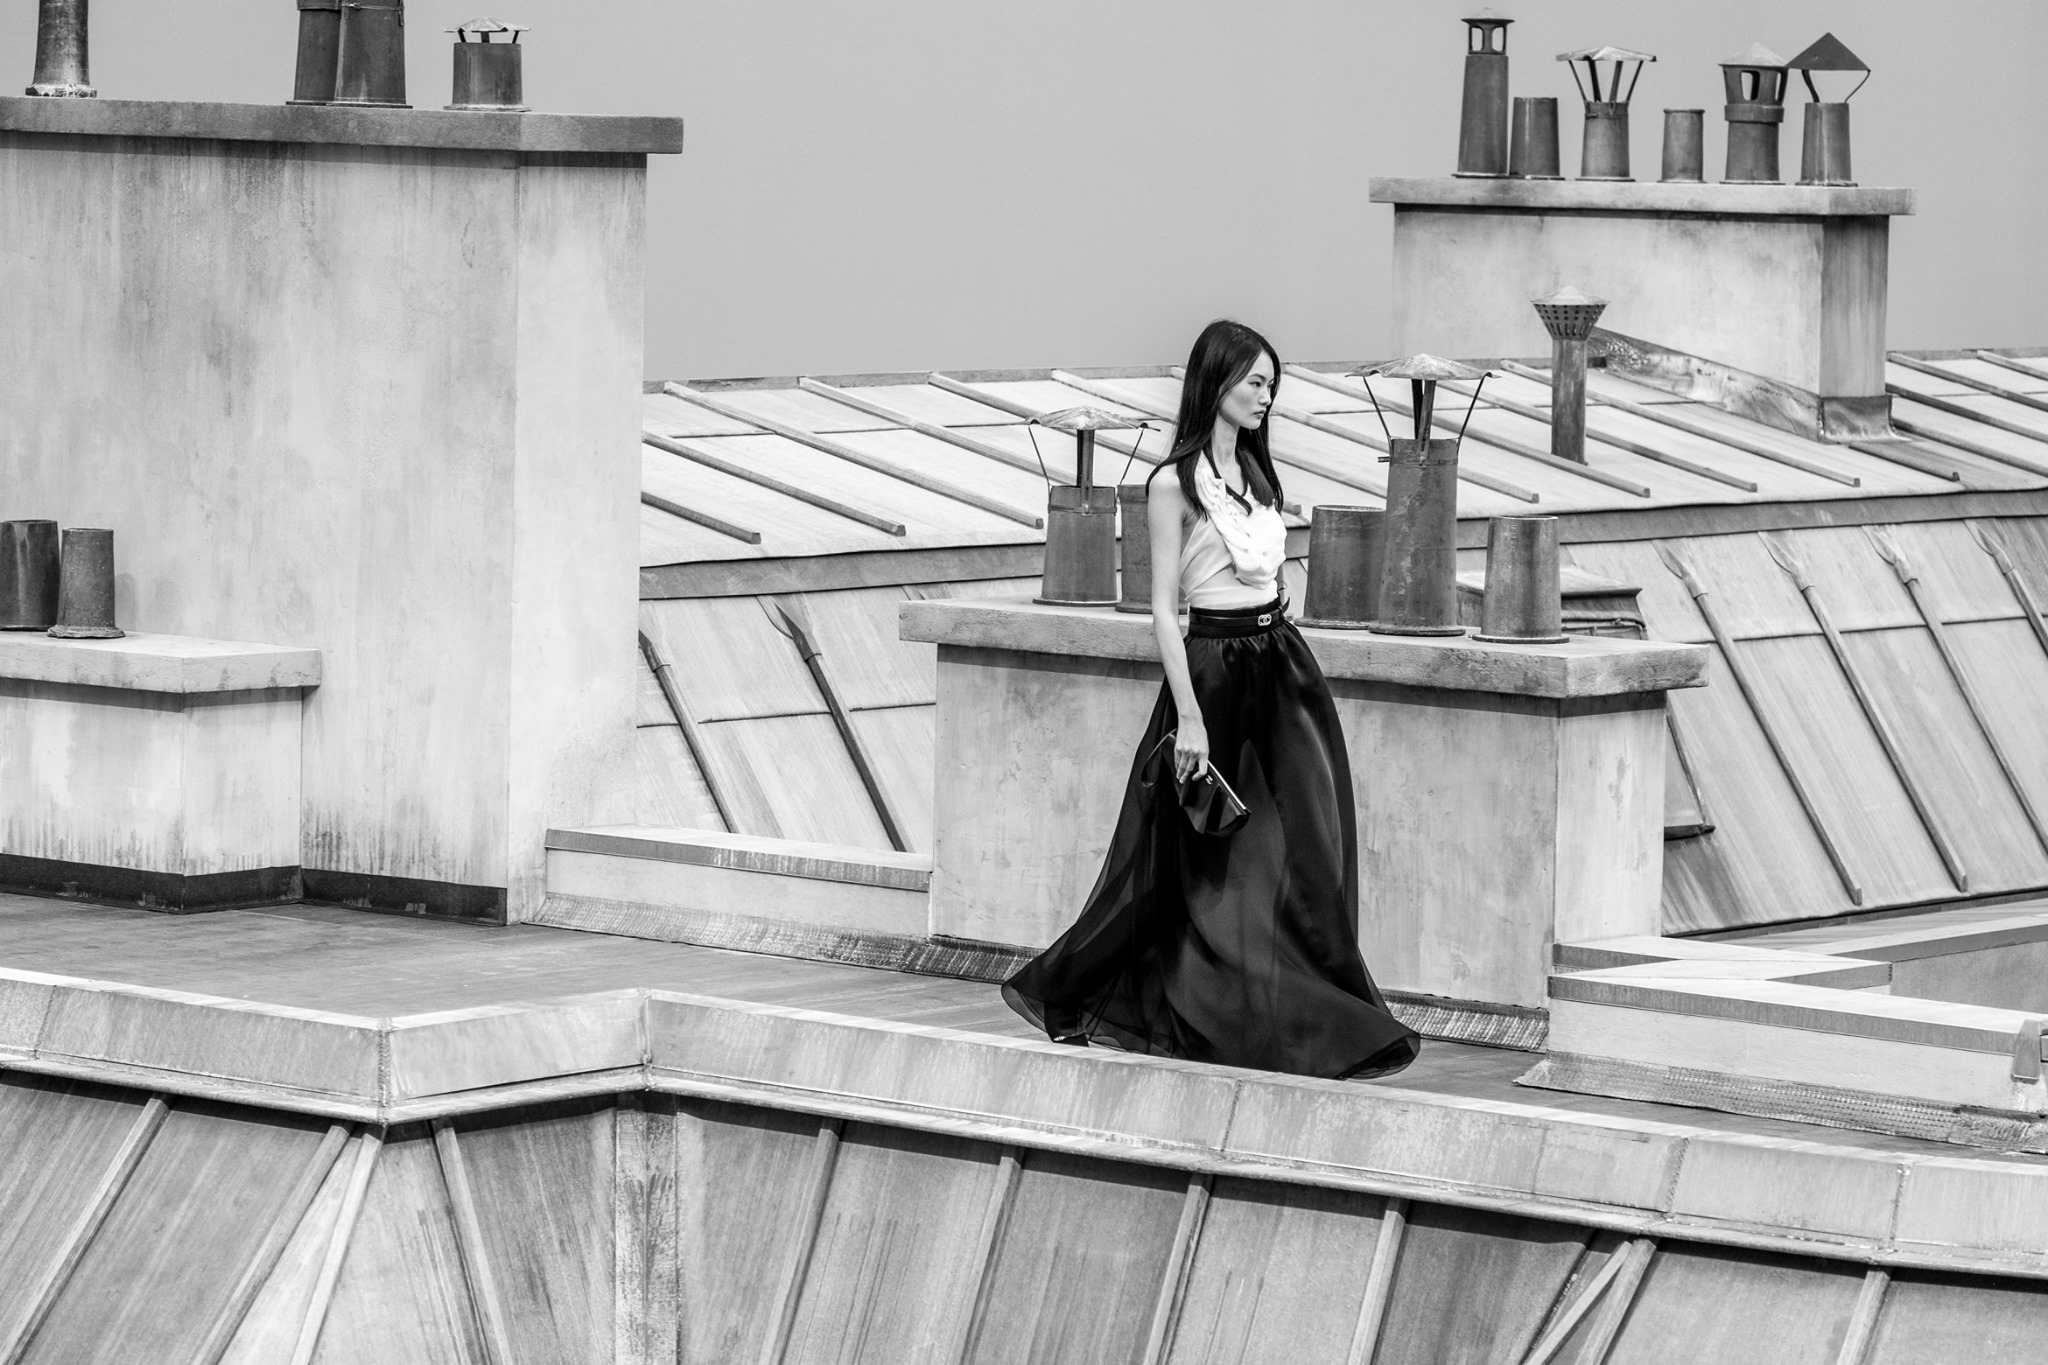 Hindering no movement, fluid organza dresses swept Parisian rooftops recreated under the nave of the Grand Palais at the Spring-Summer 2020 show.